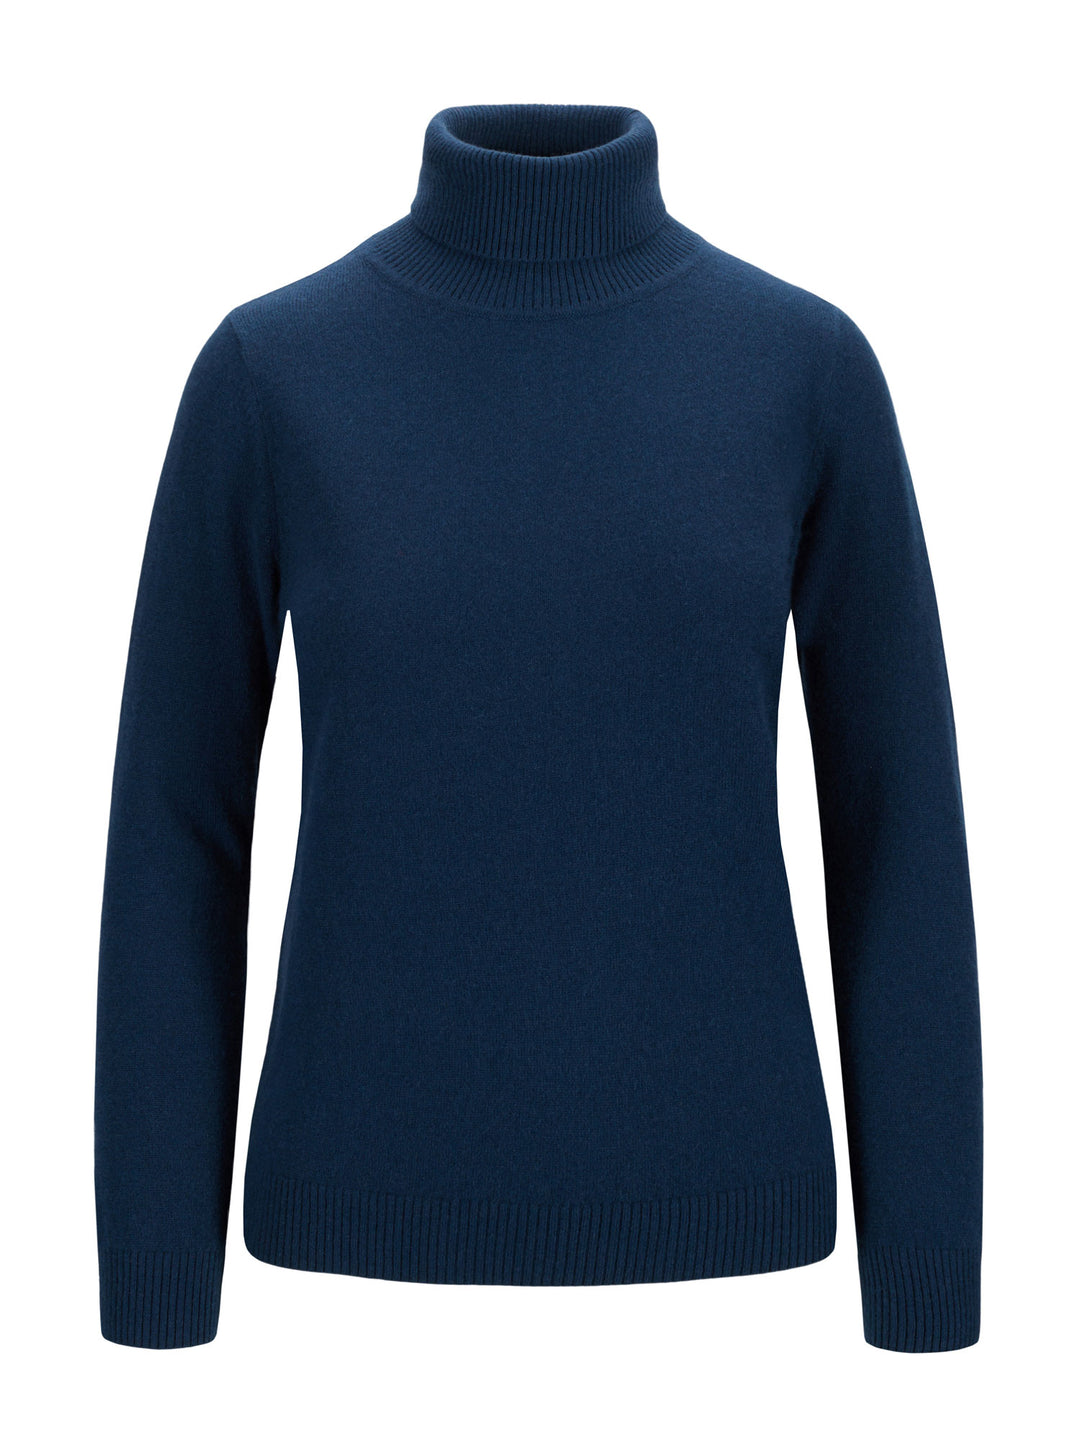 Turtleneck cashmere sweater, mountain blue color. 100% pure cashmere. Scandinavian design by KASHMINA of Norway.